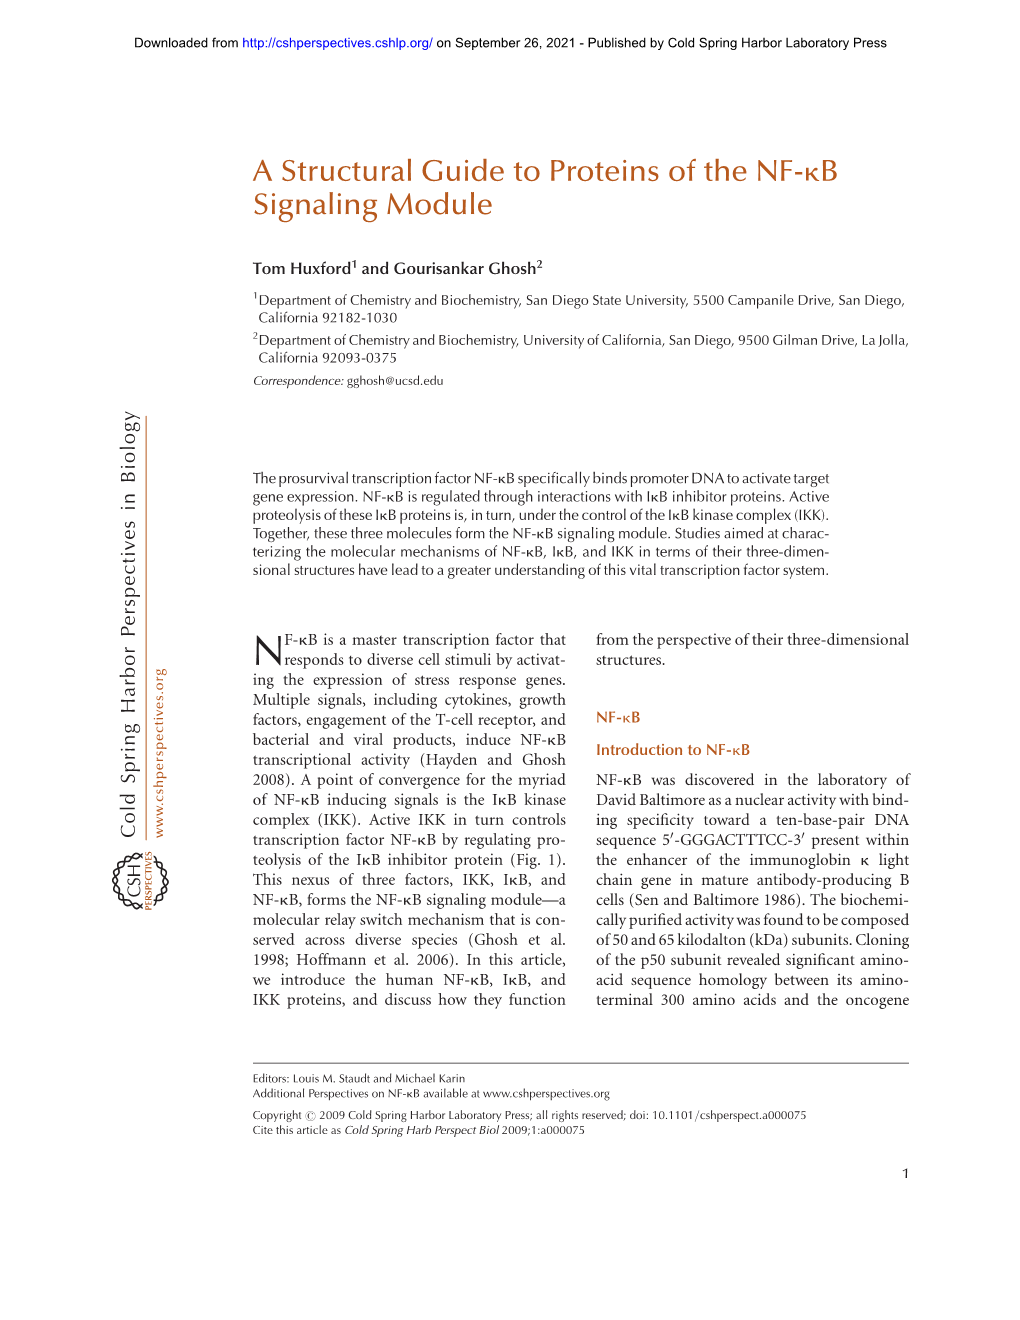 A Structural Guide to Proteins of the NF-Kb Signaling Module